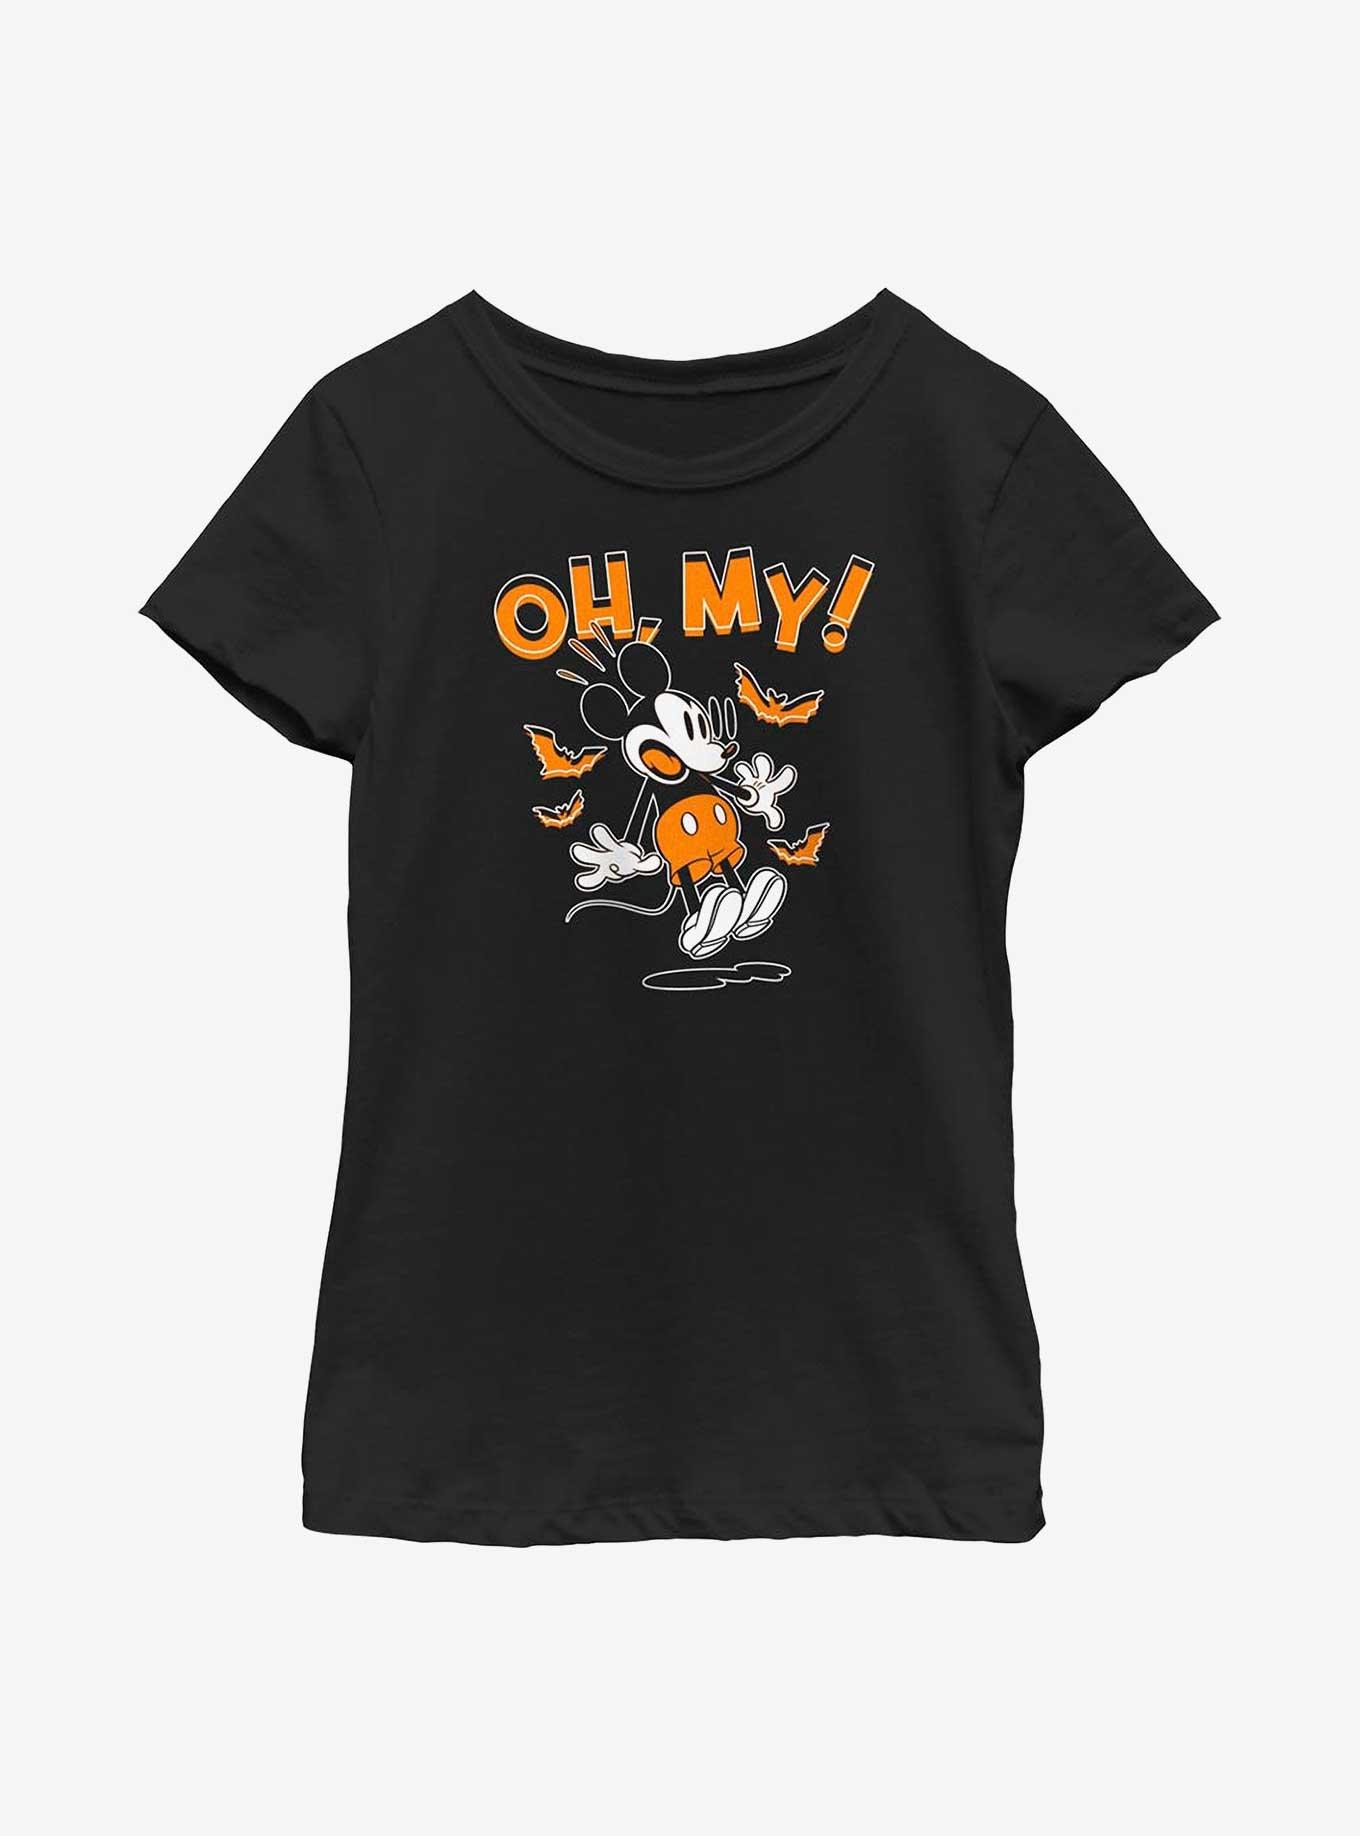 Disney Mickey Mouse Oh My Youth Girls T-Shirt, BLACK, hi-res